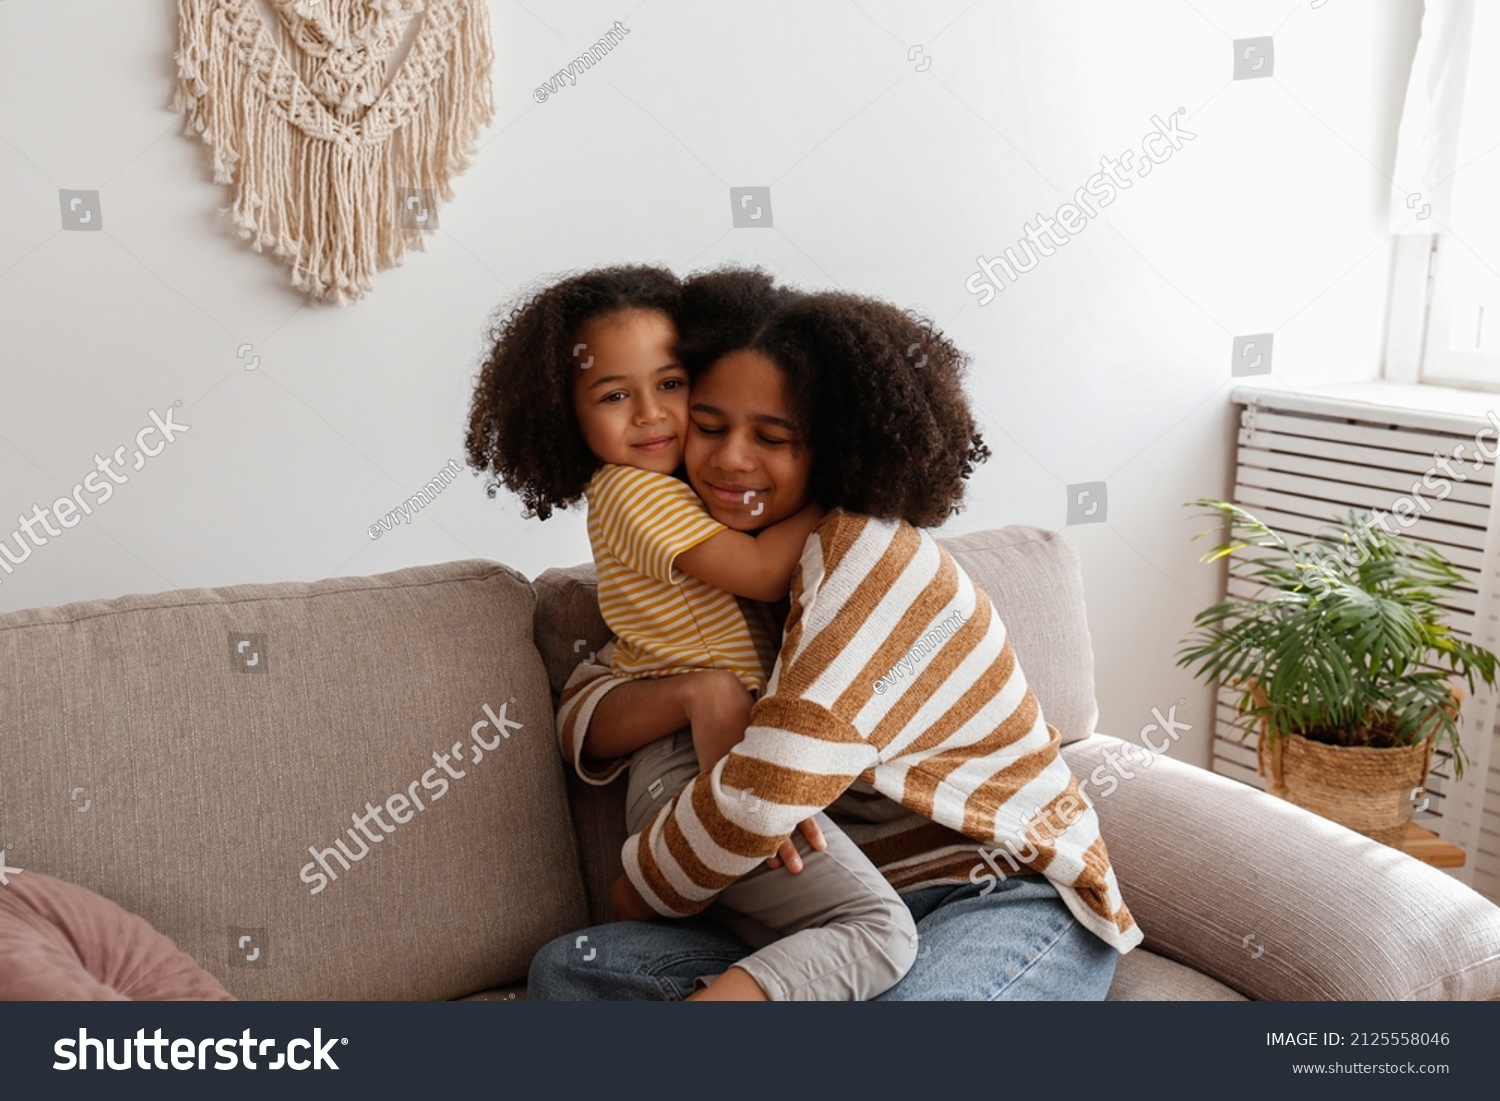 Younger and older sister spending time together at home. Two black girls of different age hugging and showing affection. Black female siblings having fun and bonding. Background, copy space, close up. #2125558046